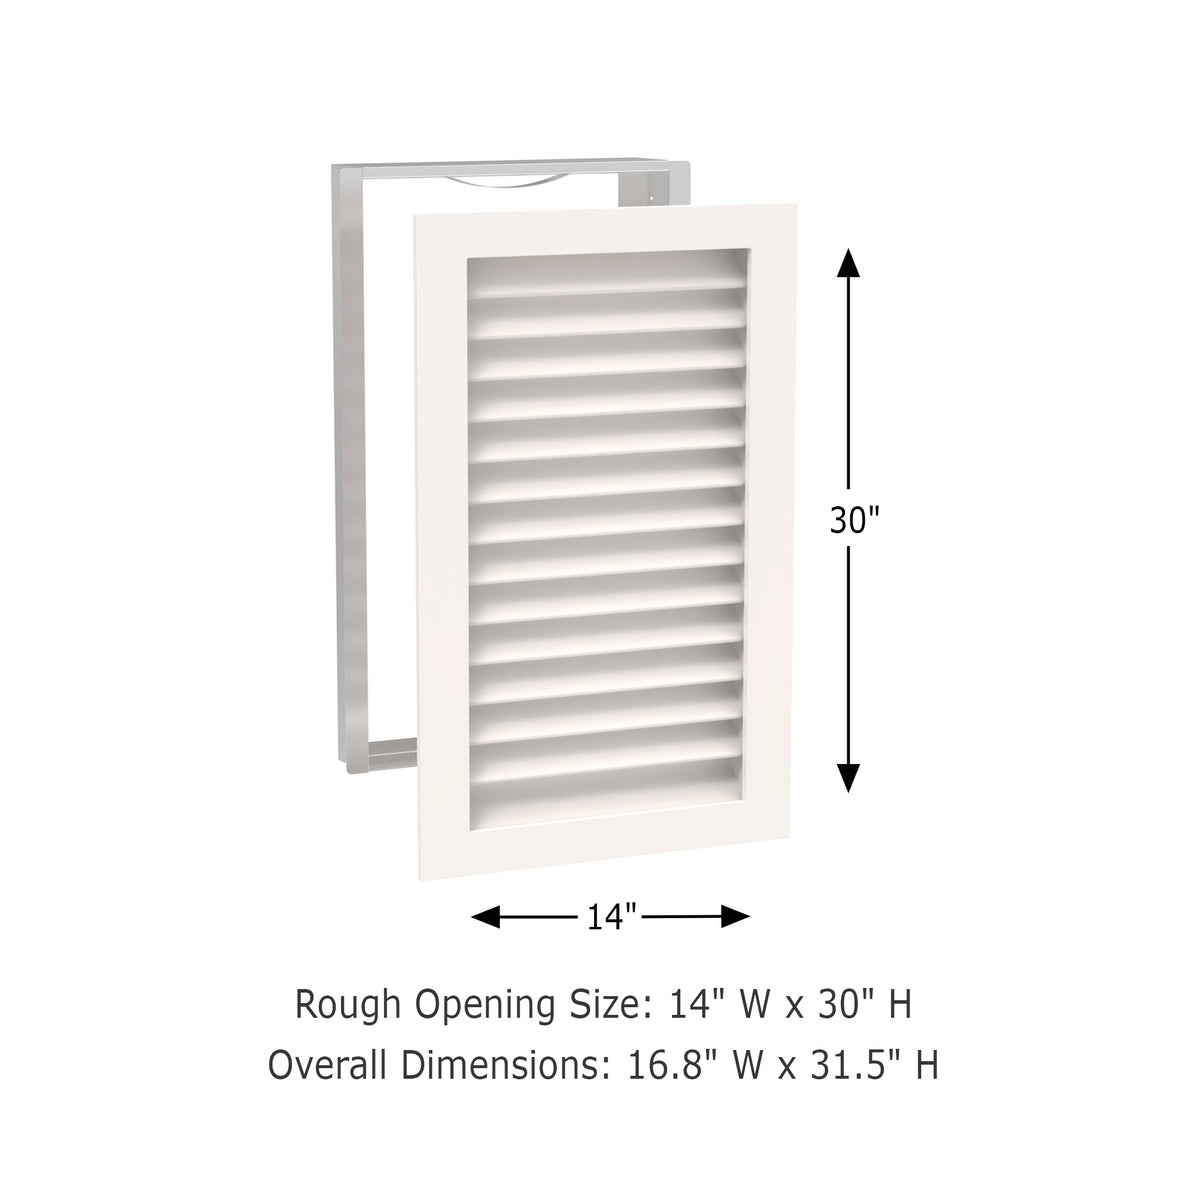 Worth Home Products - decorative wood AC vent covers luxury return vent - Primed Wood Louvers 14x30